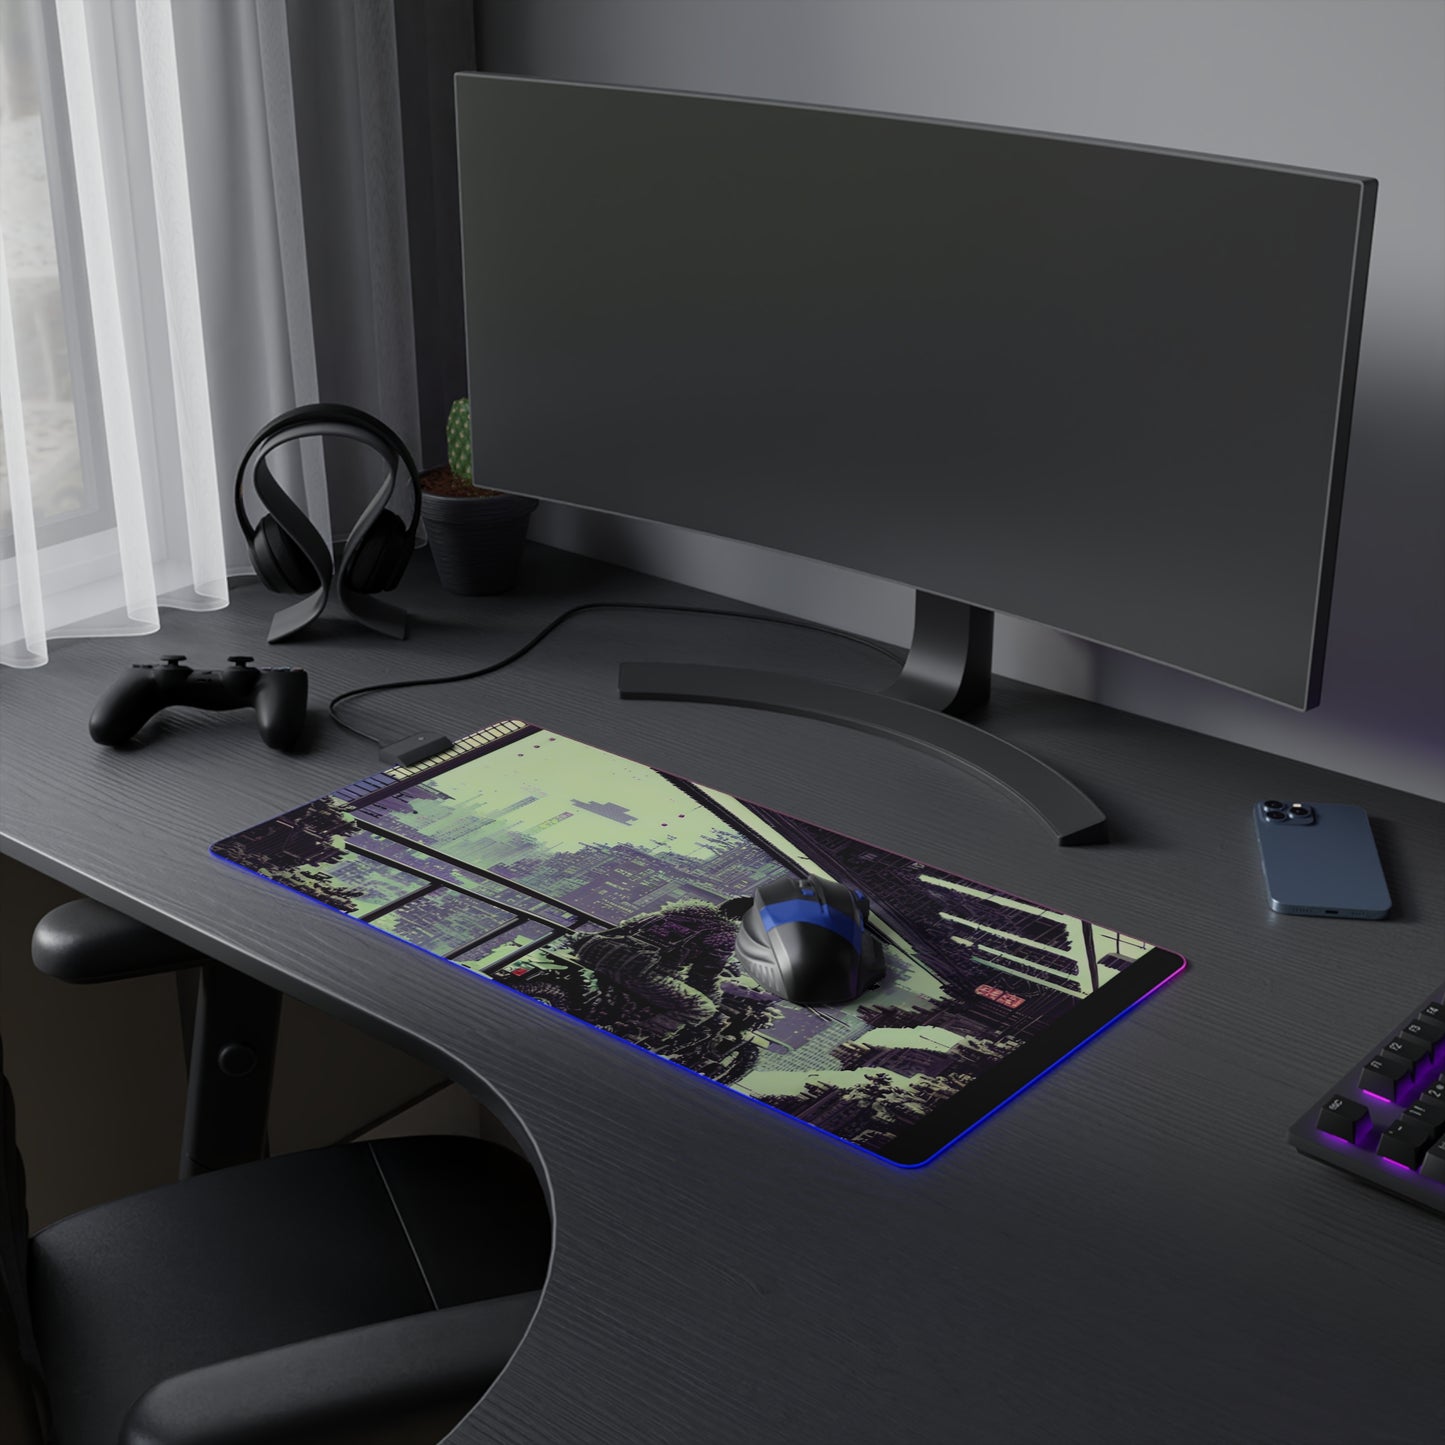 Lone Pixel Rider LED Gaming Mouse Pad